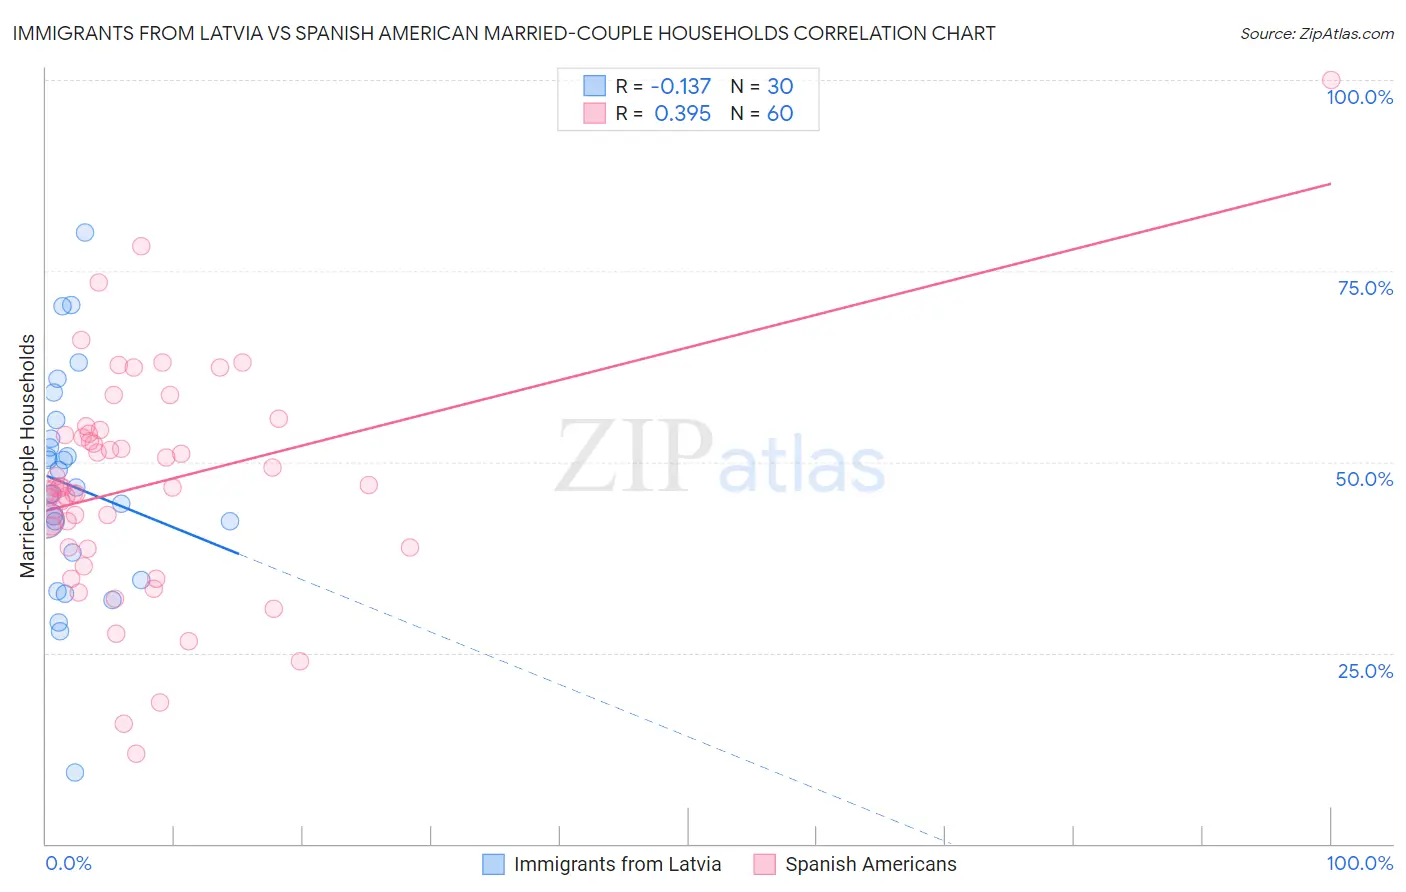 Immigrants from Latvia vs Spanish American Married-couple Households